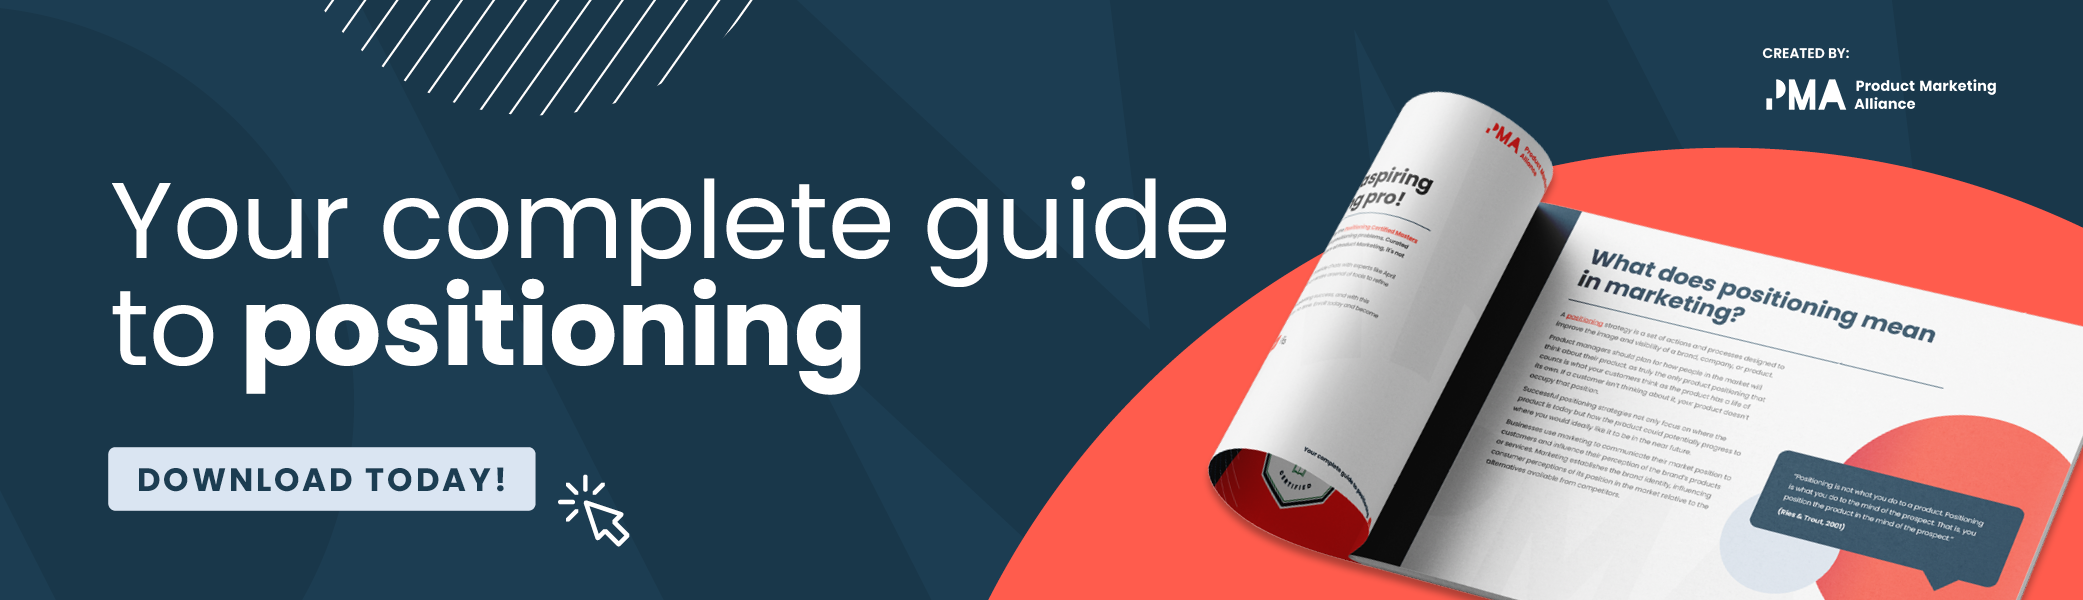 Your complete guide to positioning – Download today!